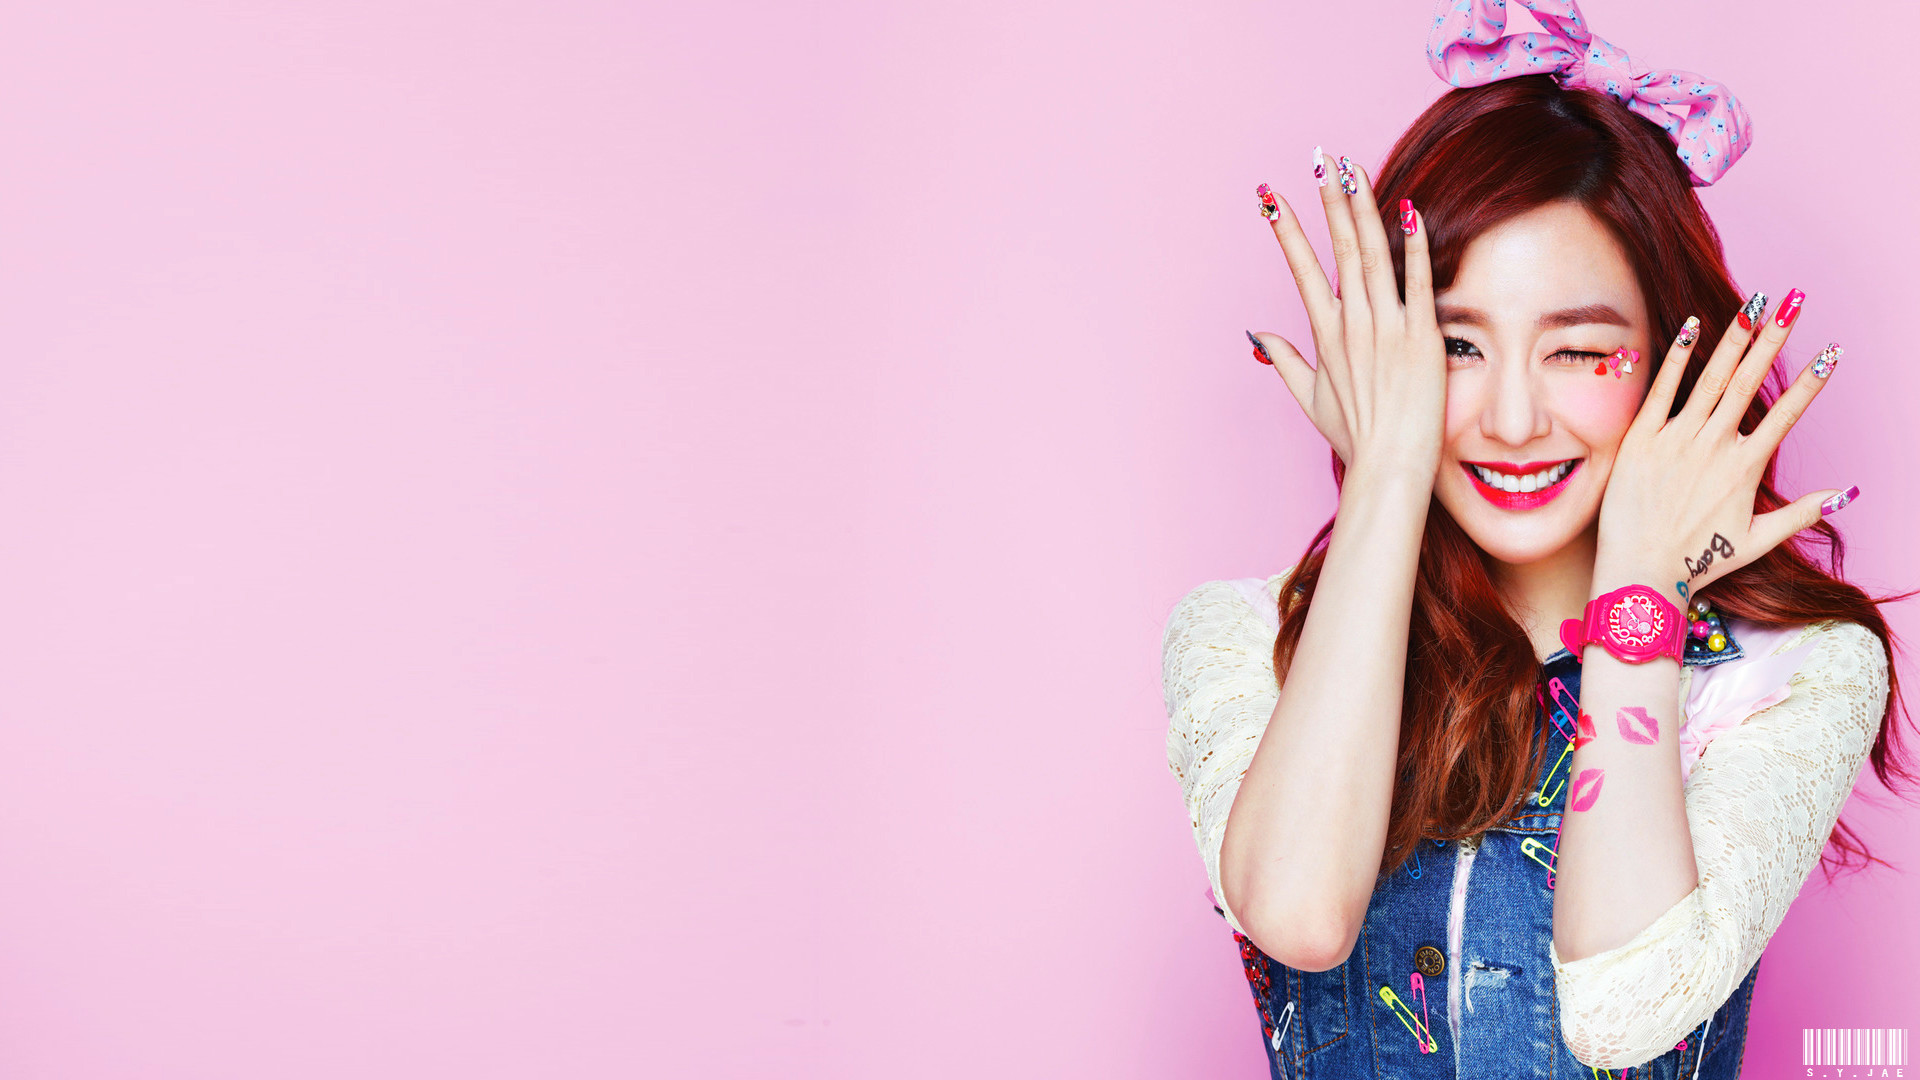 1920x1080 ... ExoticGeneration21 TIFFANY [KISS ME BABY-G] WALLPAPER 1920 X 1080 by  ExoticGeneration21